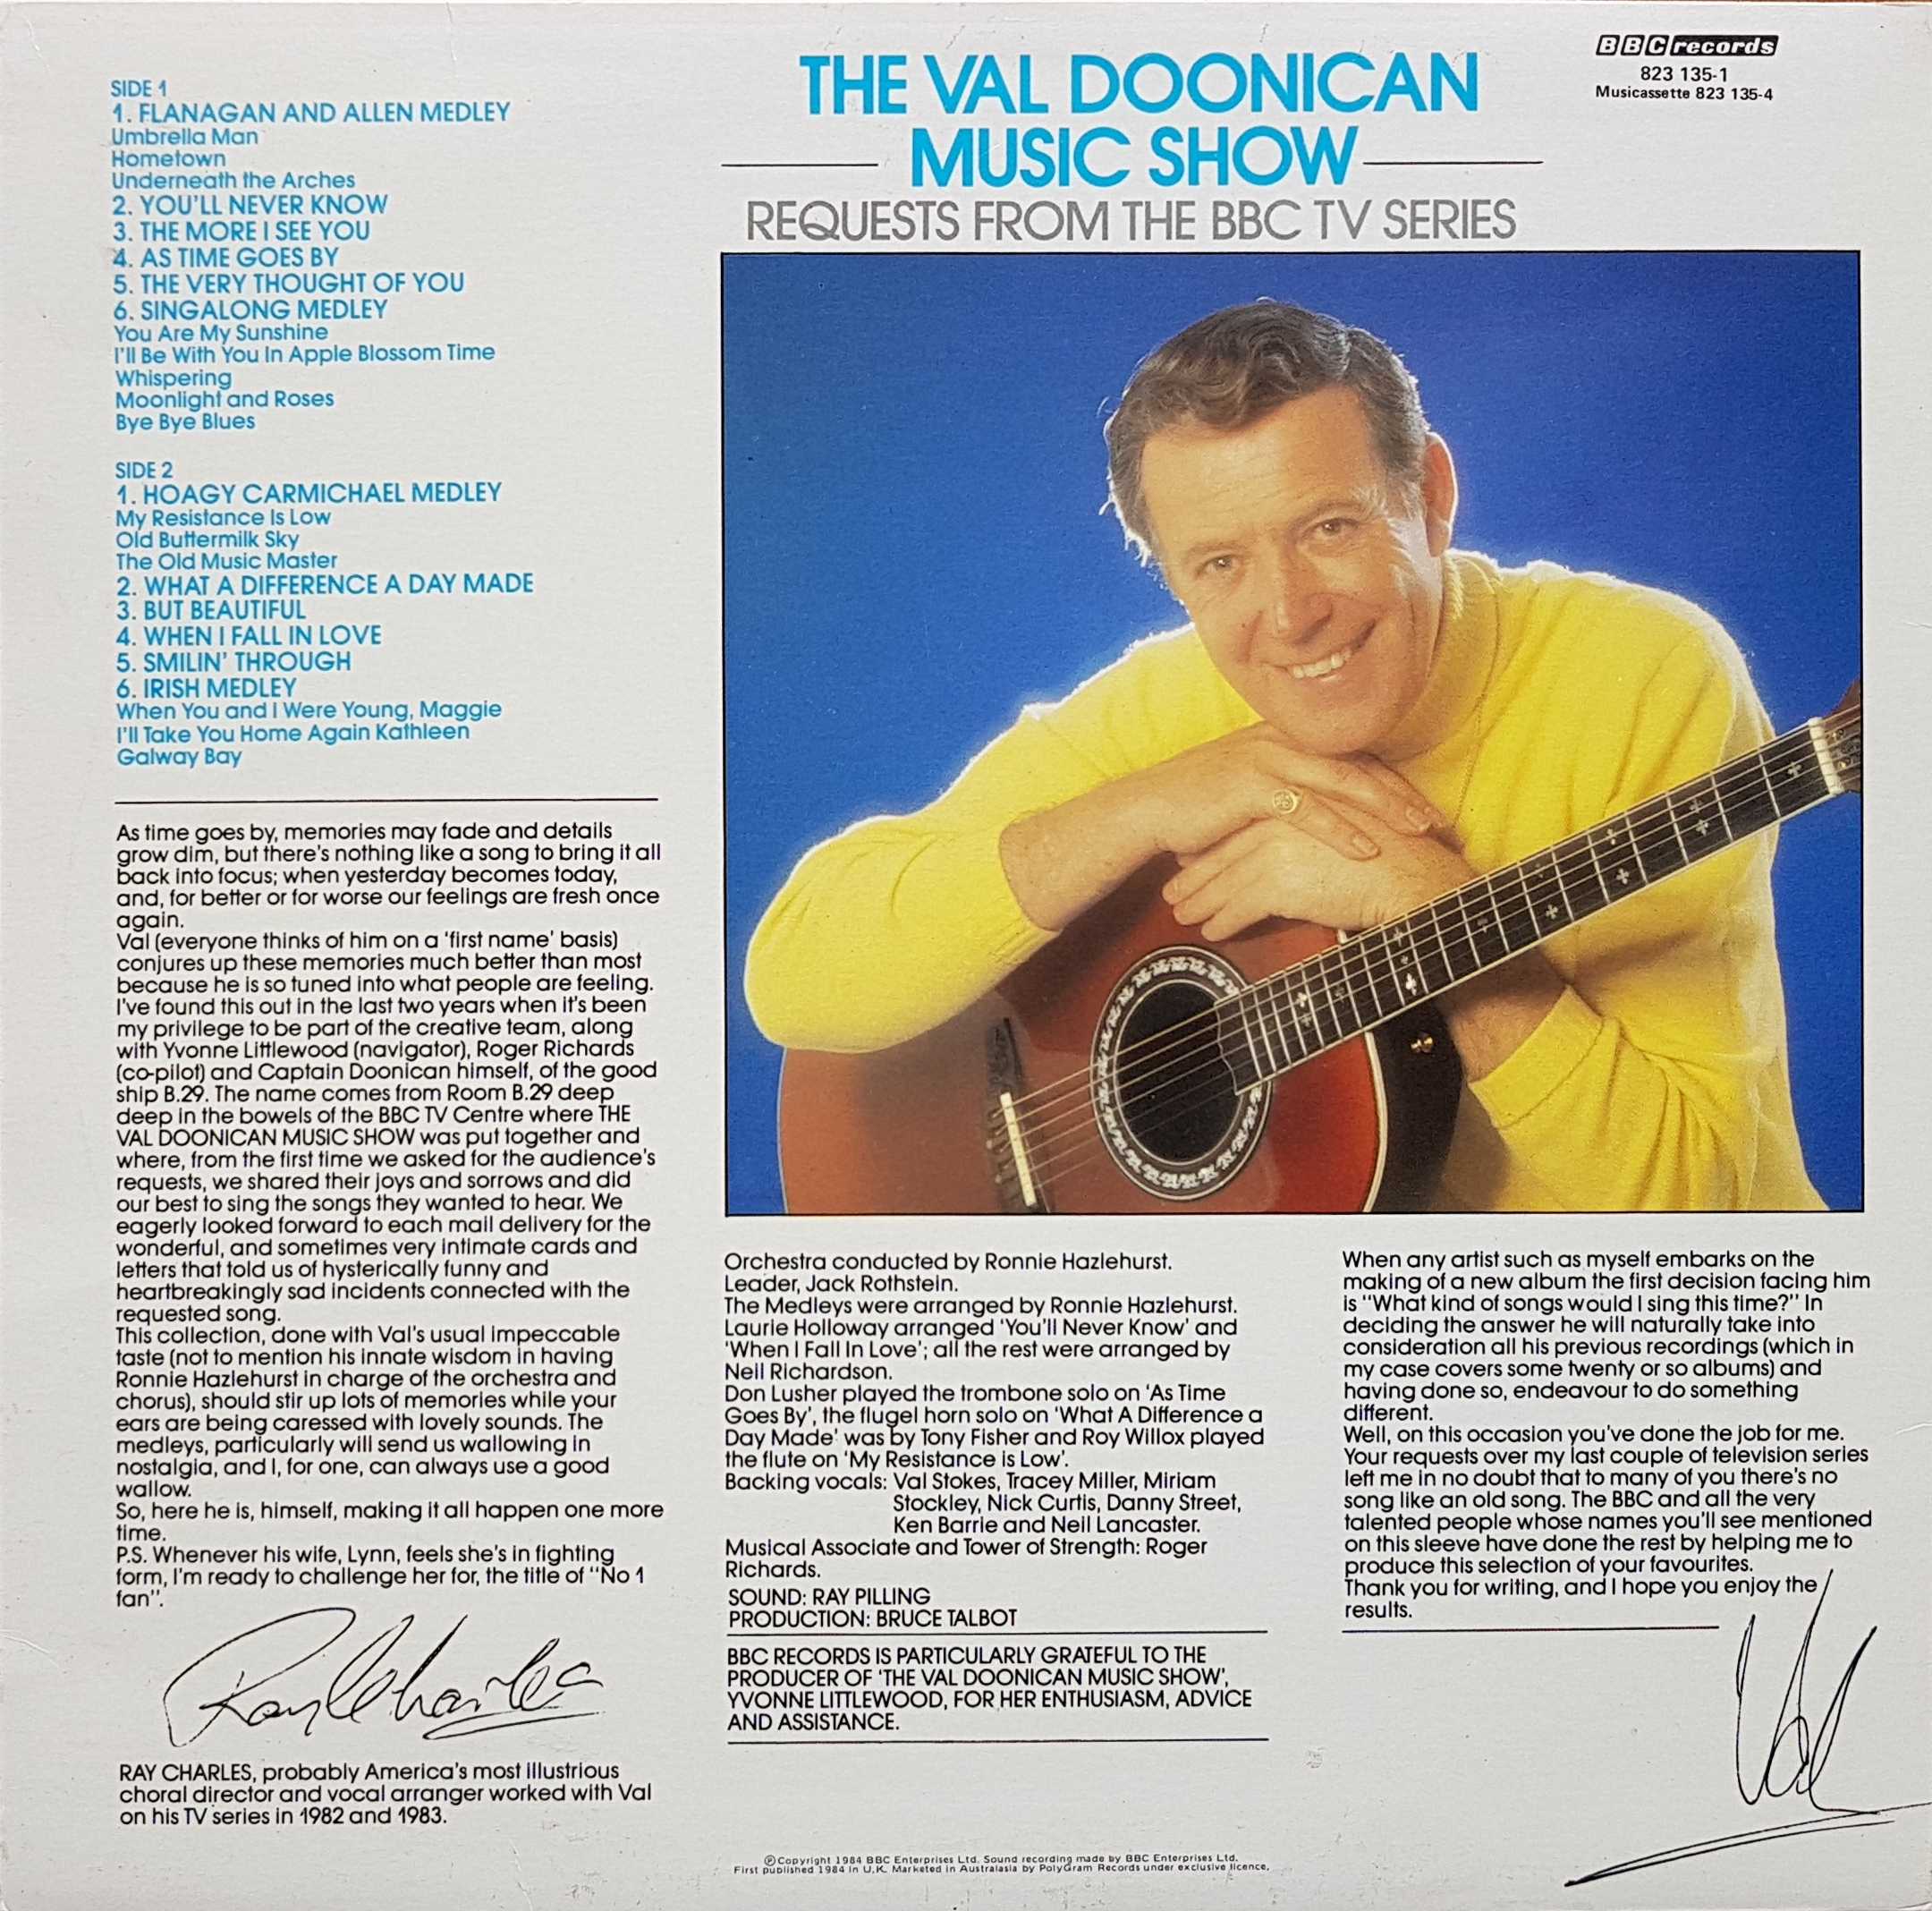 Picture of 823 135-1 The Val Doonican Music Show by artist Various from the BBC records and Tapes library